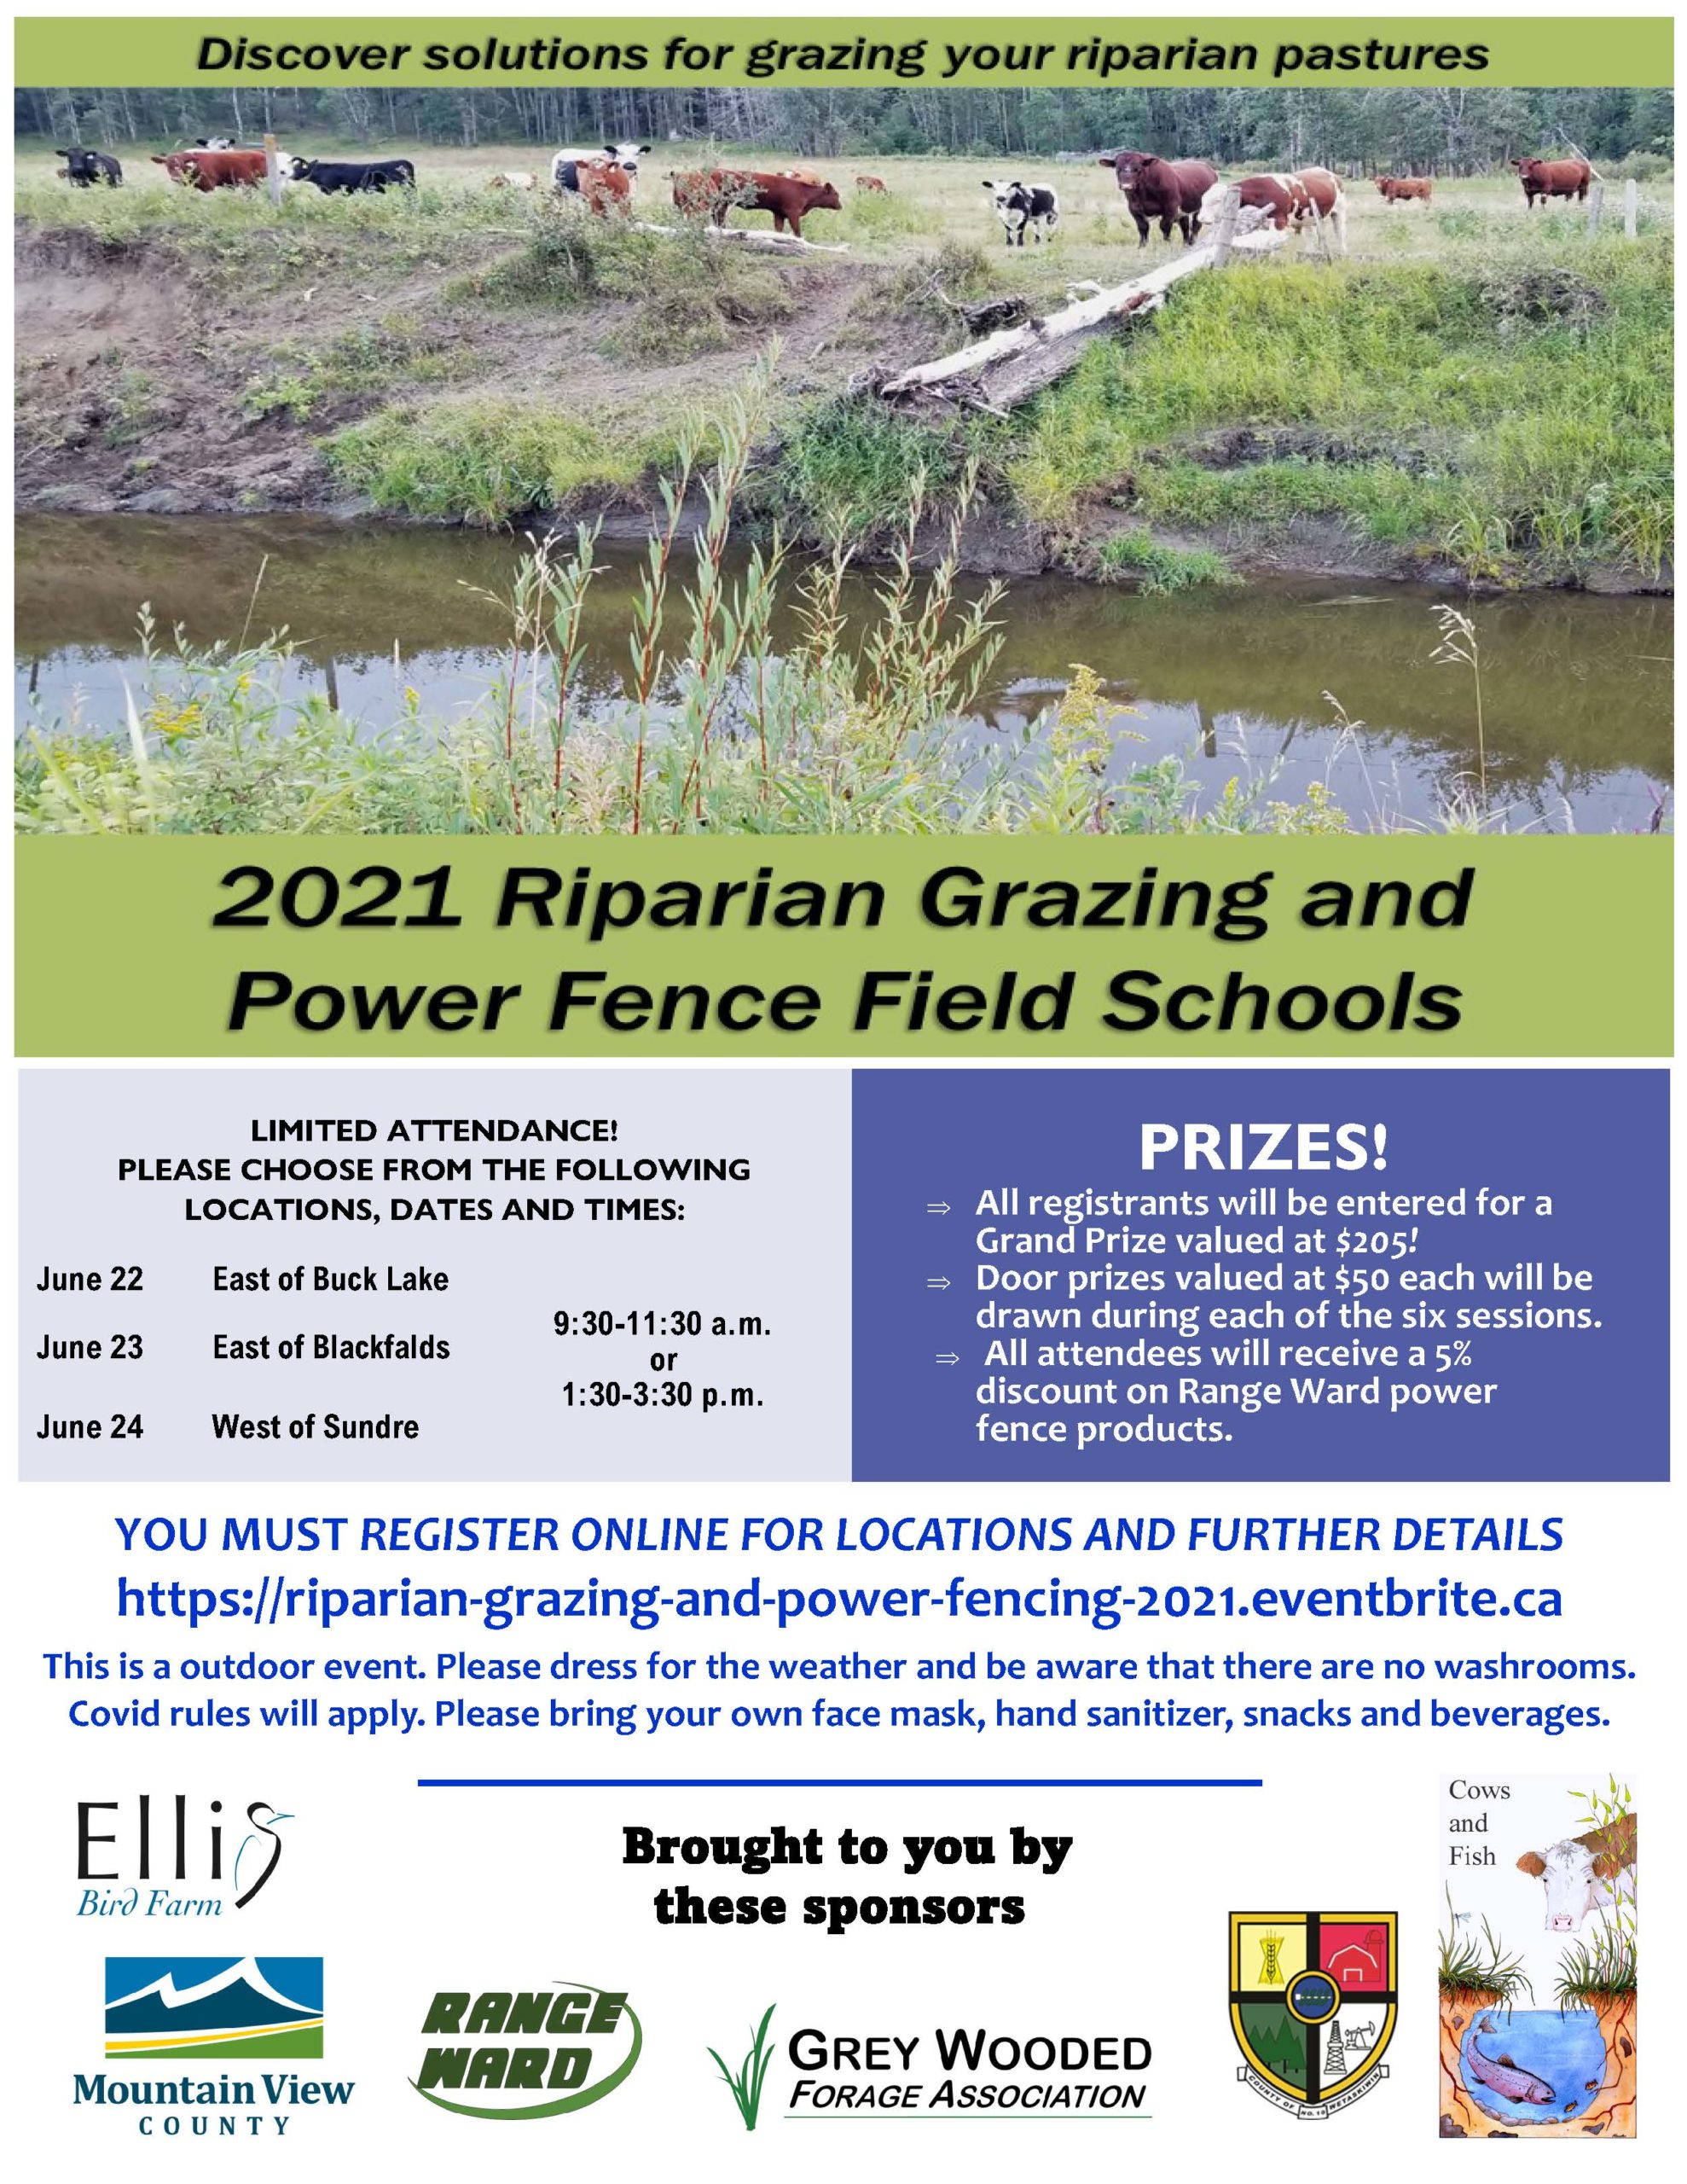 Riparian Grazing and Power Fence Field Schools